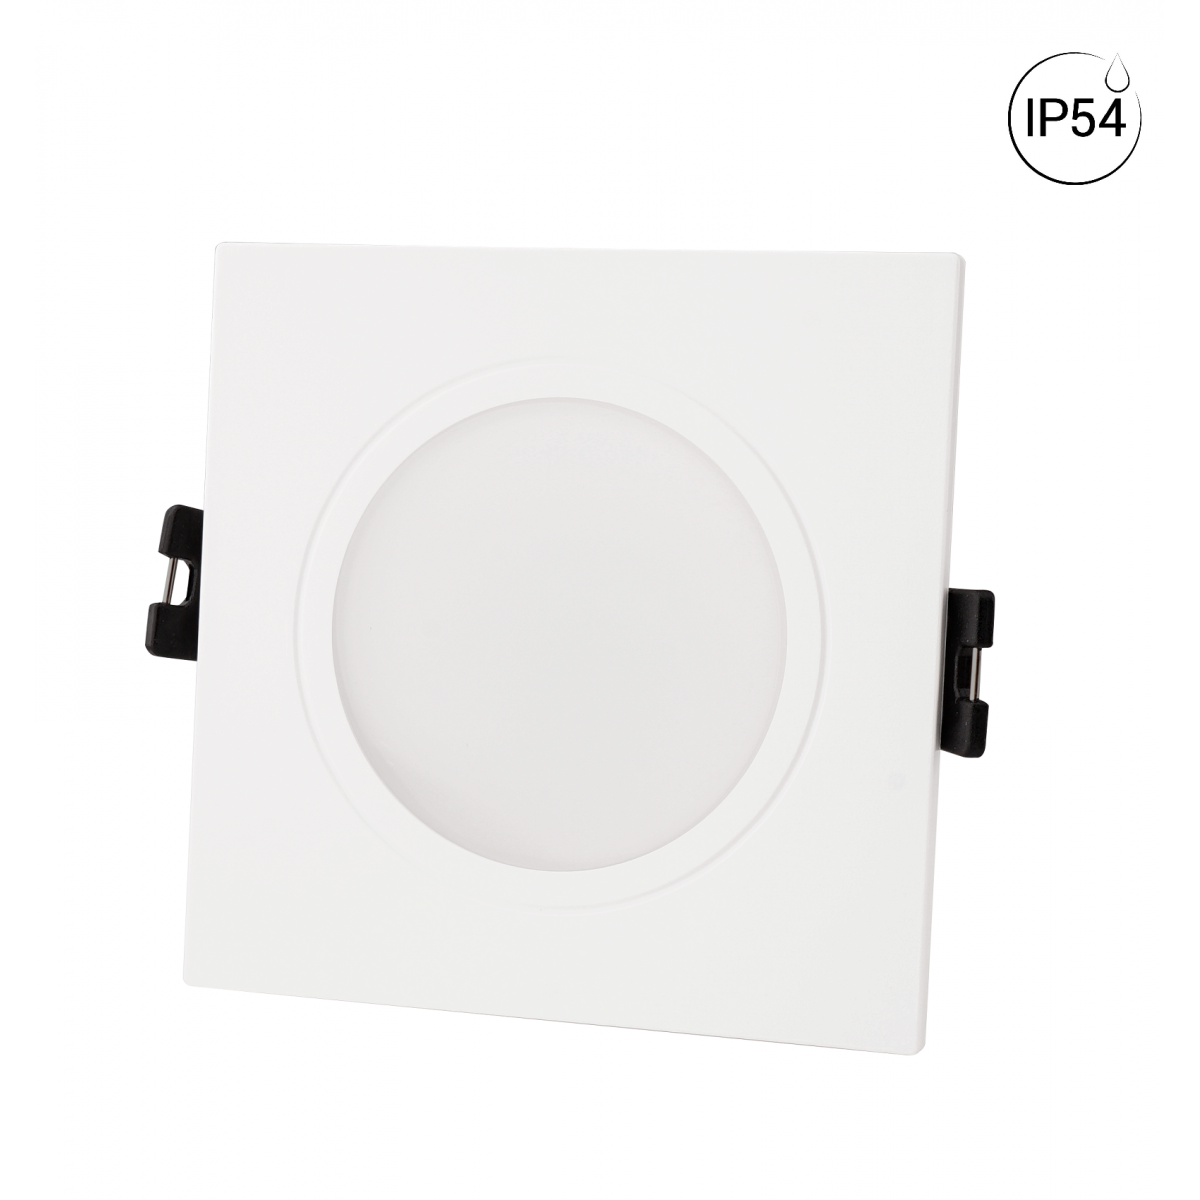 Square downlight ring for GU10 bulb - Cut-out Ø 75-80 mm - IP54 - WHITE